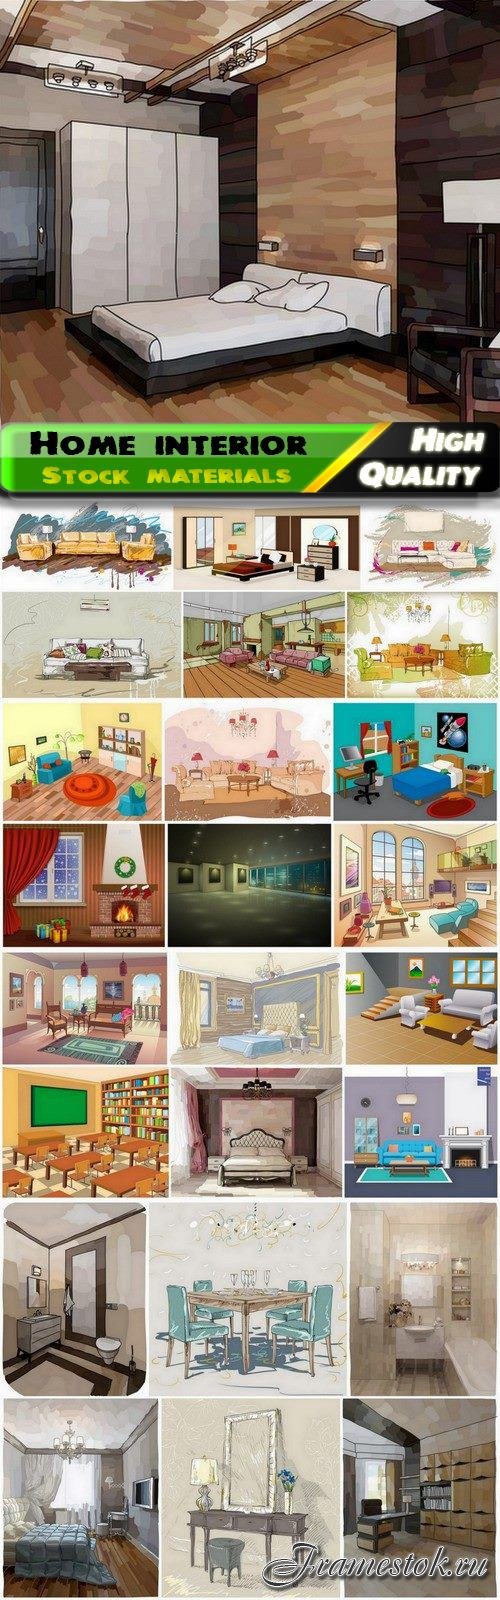 Sketches and illustrations of home interior - 25 Eps